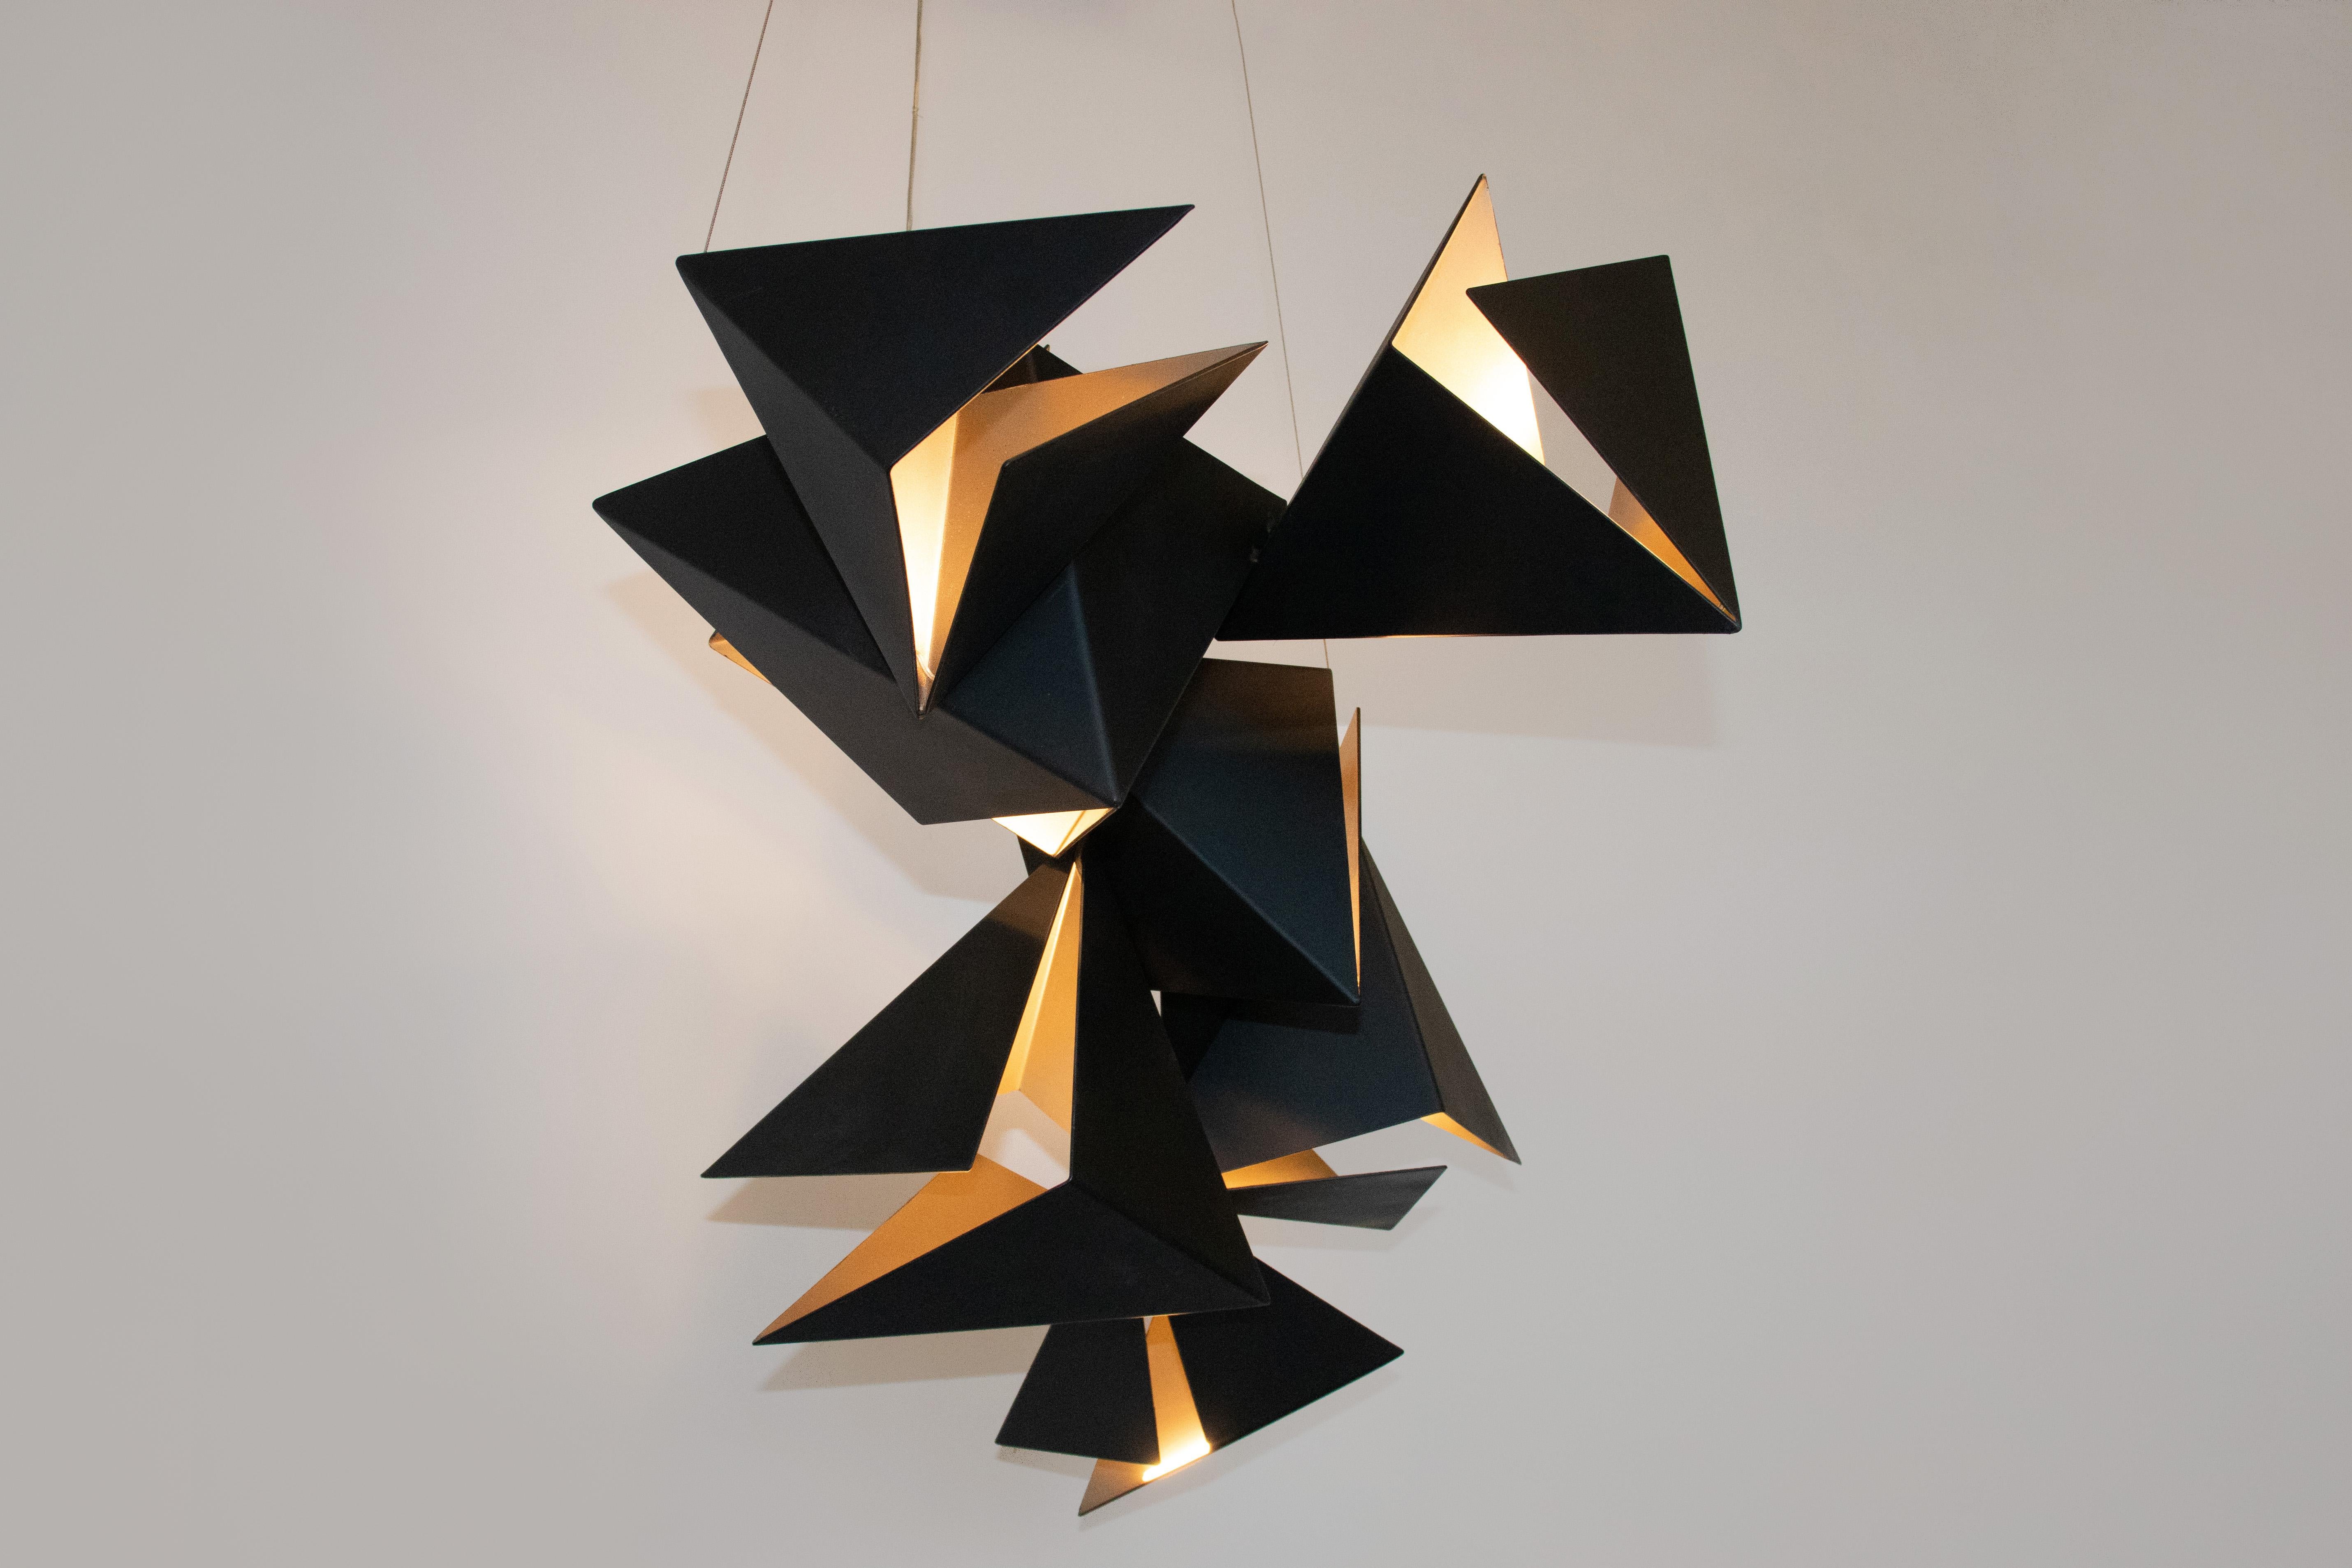 The Rapture pendant is a dynamic grouping of geometric brake formed pendants with a two-tone finish to highlight the internal LED light source. The RAPTURE Pendant comes in groupings of 3, 5 and 7 formed diffusers. These can be suspended as single